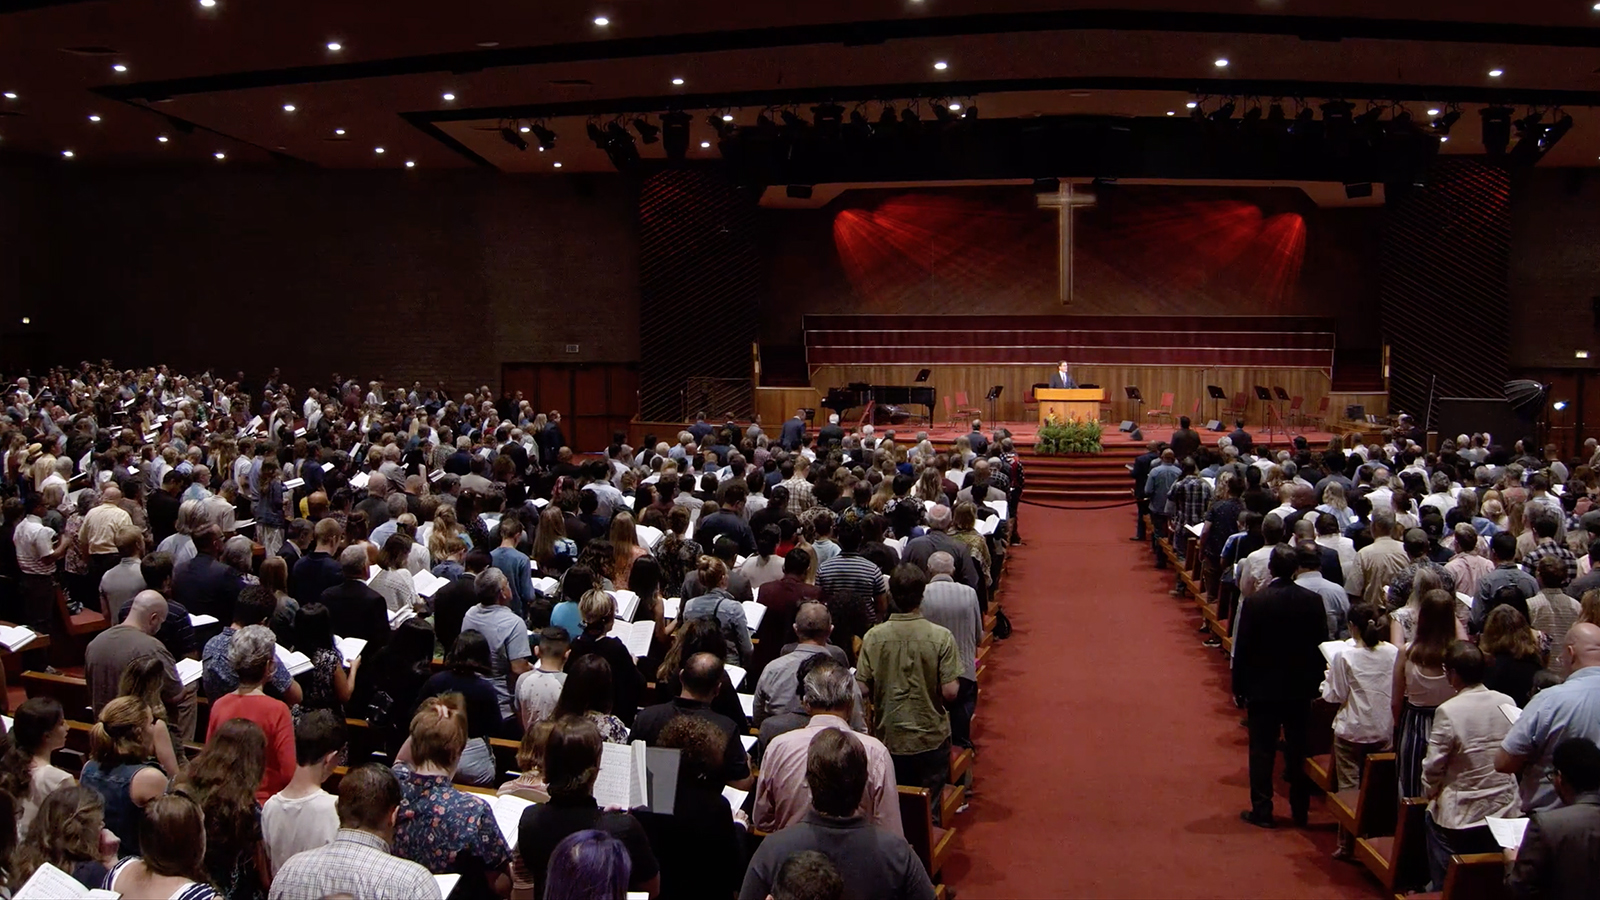 The Sunday morning service concludes at Grace Community Church in Sun Valley, California, July 26, 2020. Video screengrab via Vimeo/Grace Community Church